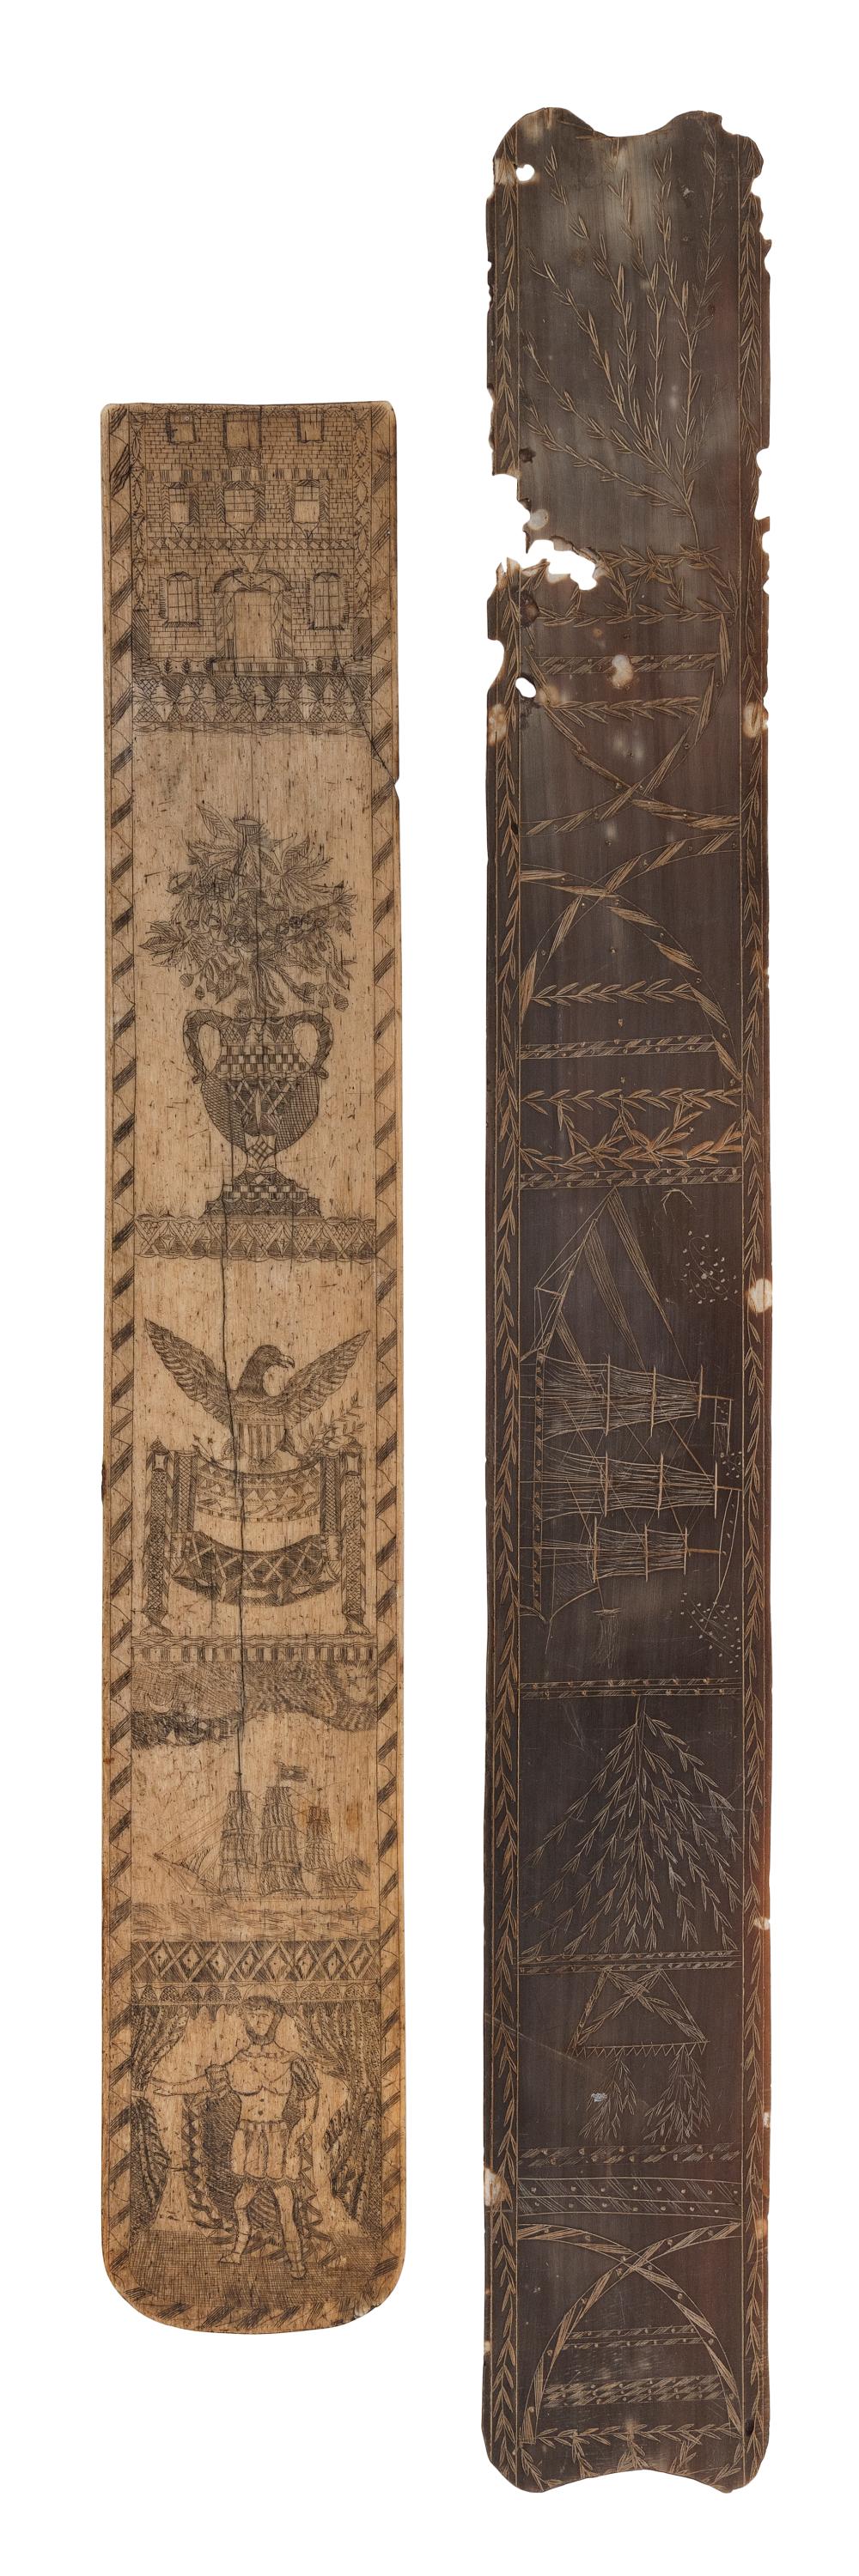 TWO SCRIMSHAW BUSKS MID 19TH CENTURYTWO 35012d